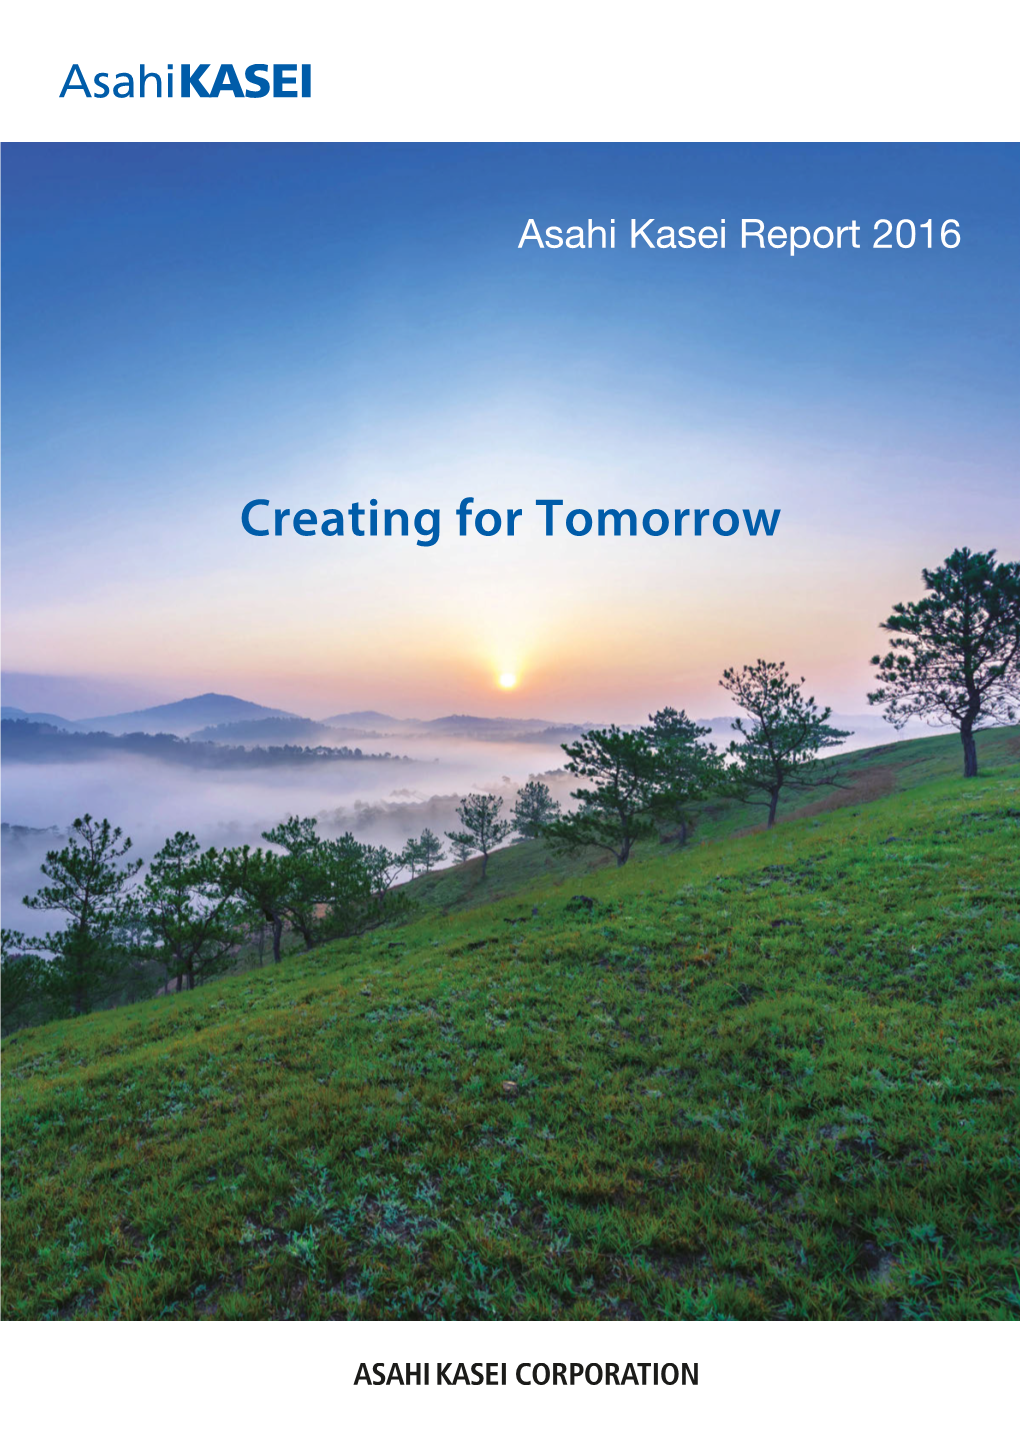 Creating for Tomorrow Group Mission We, the Asahi Kasei Group, Contribute to Life and Living for People Around the World